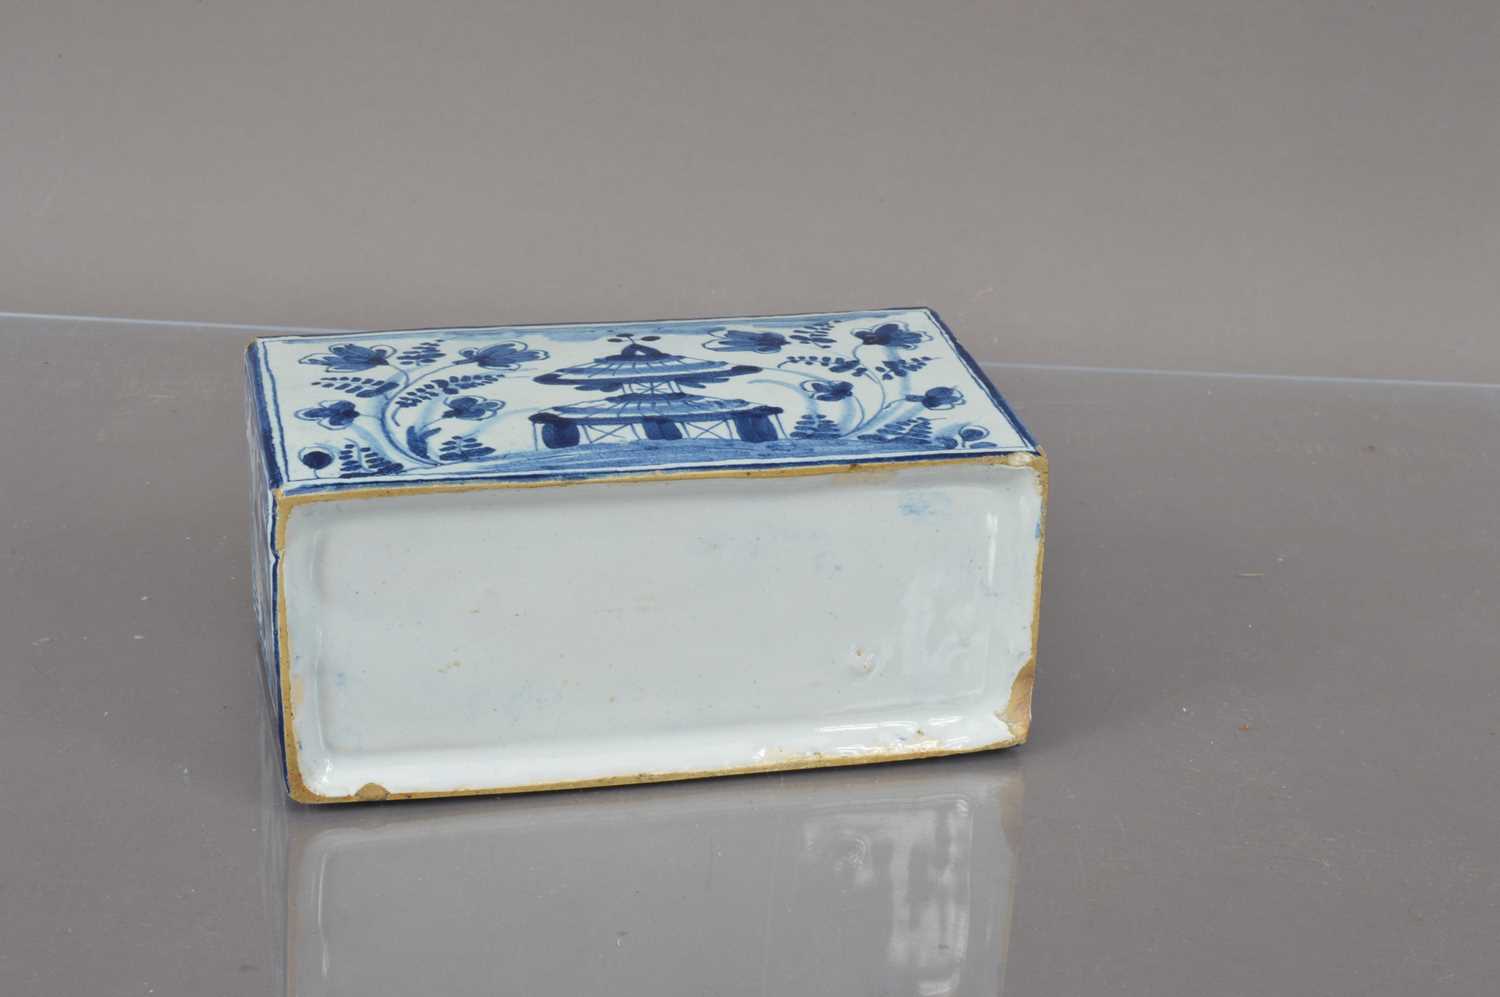 A Delft style blue and white pottery flower brick, - Image 3 of 4